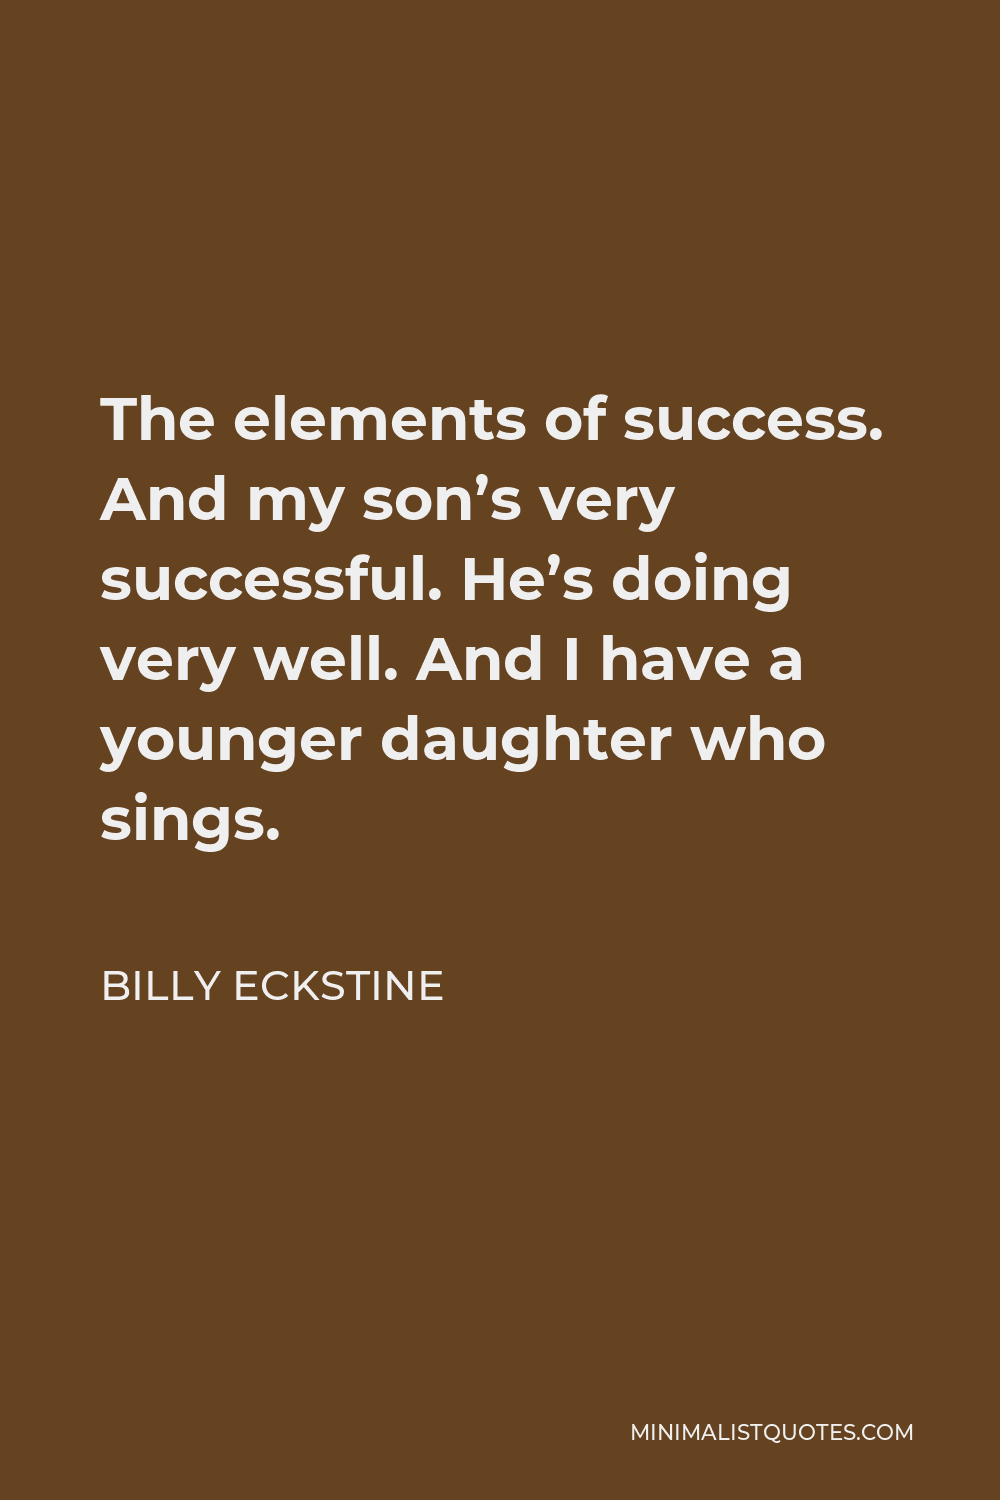 Billy Eckstine Quote - The elements of success. And my son’s very successful. He’s doing very well. And I have a younger daughter who sings.